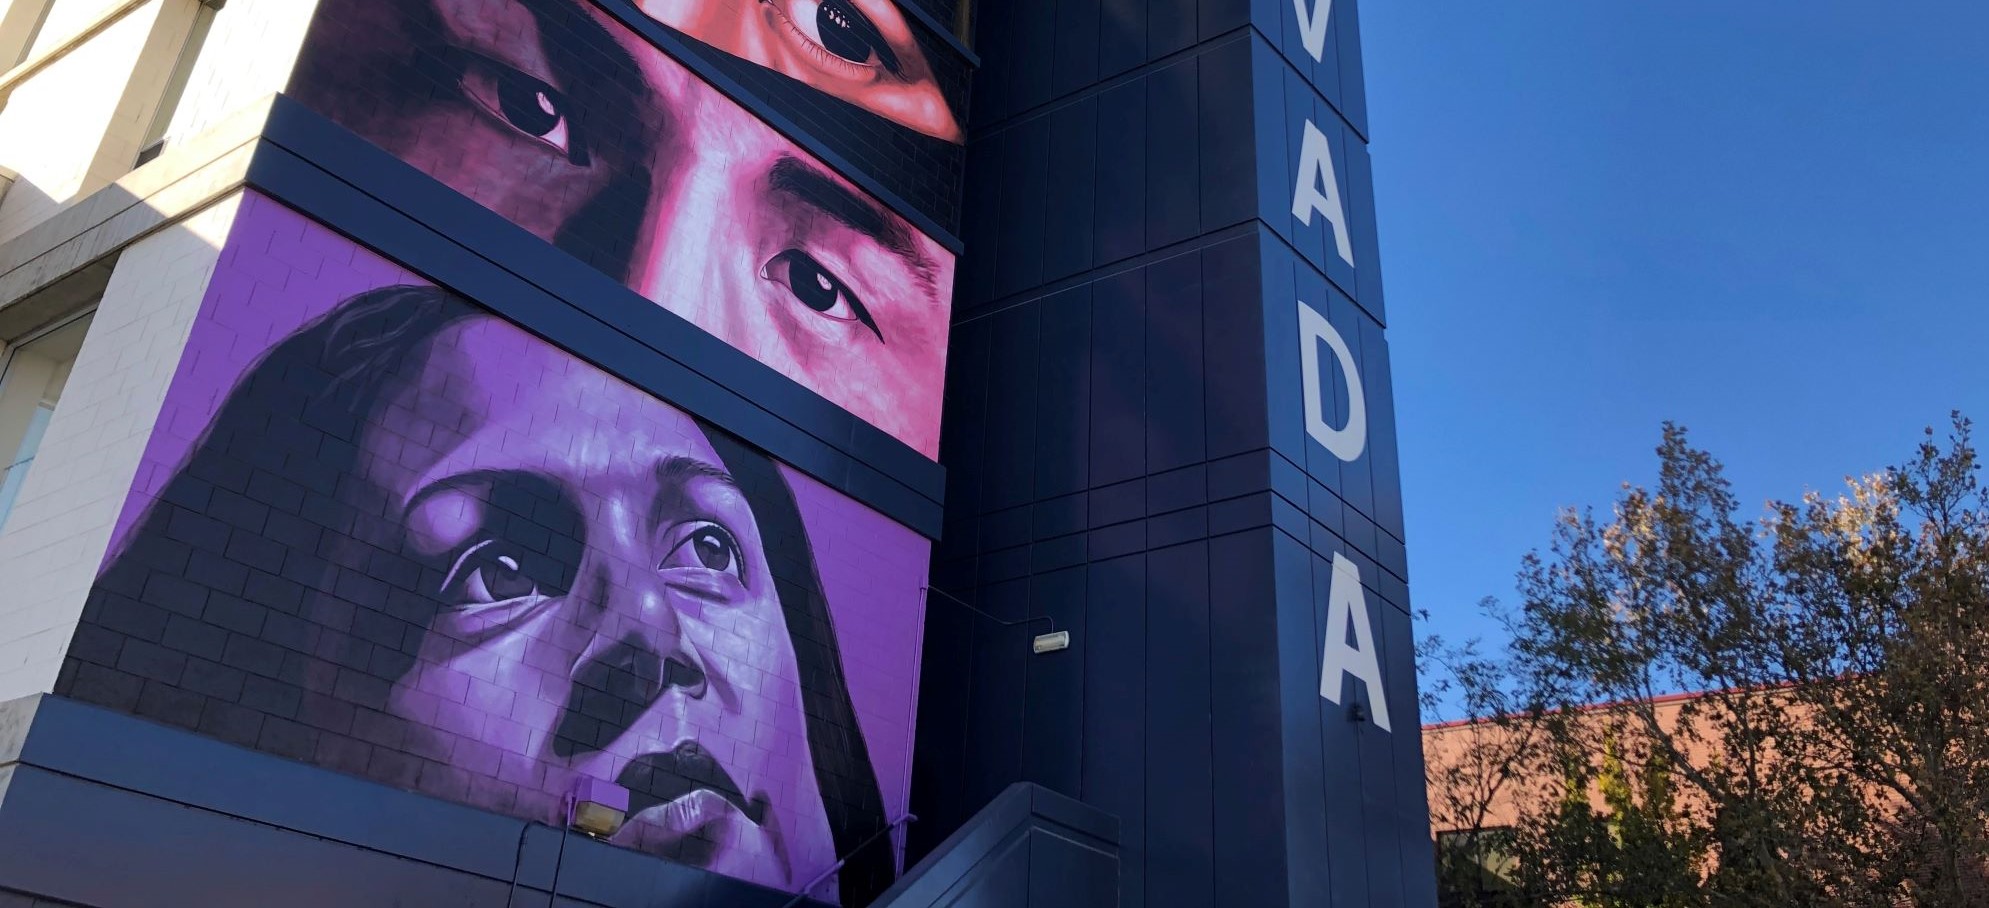 Photograph of the mural on the outside of Sierra tower showing diverse eyes with multicolored overlays